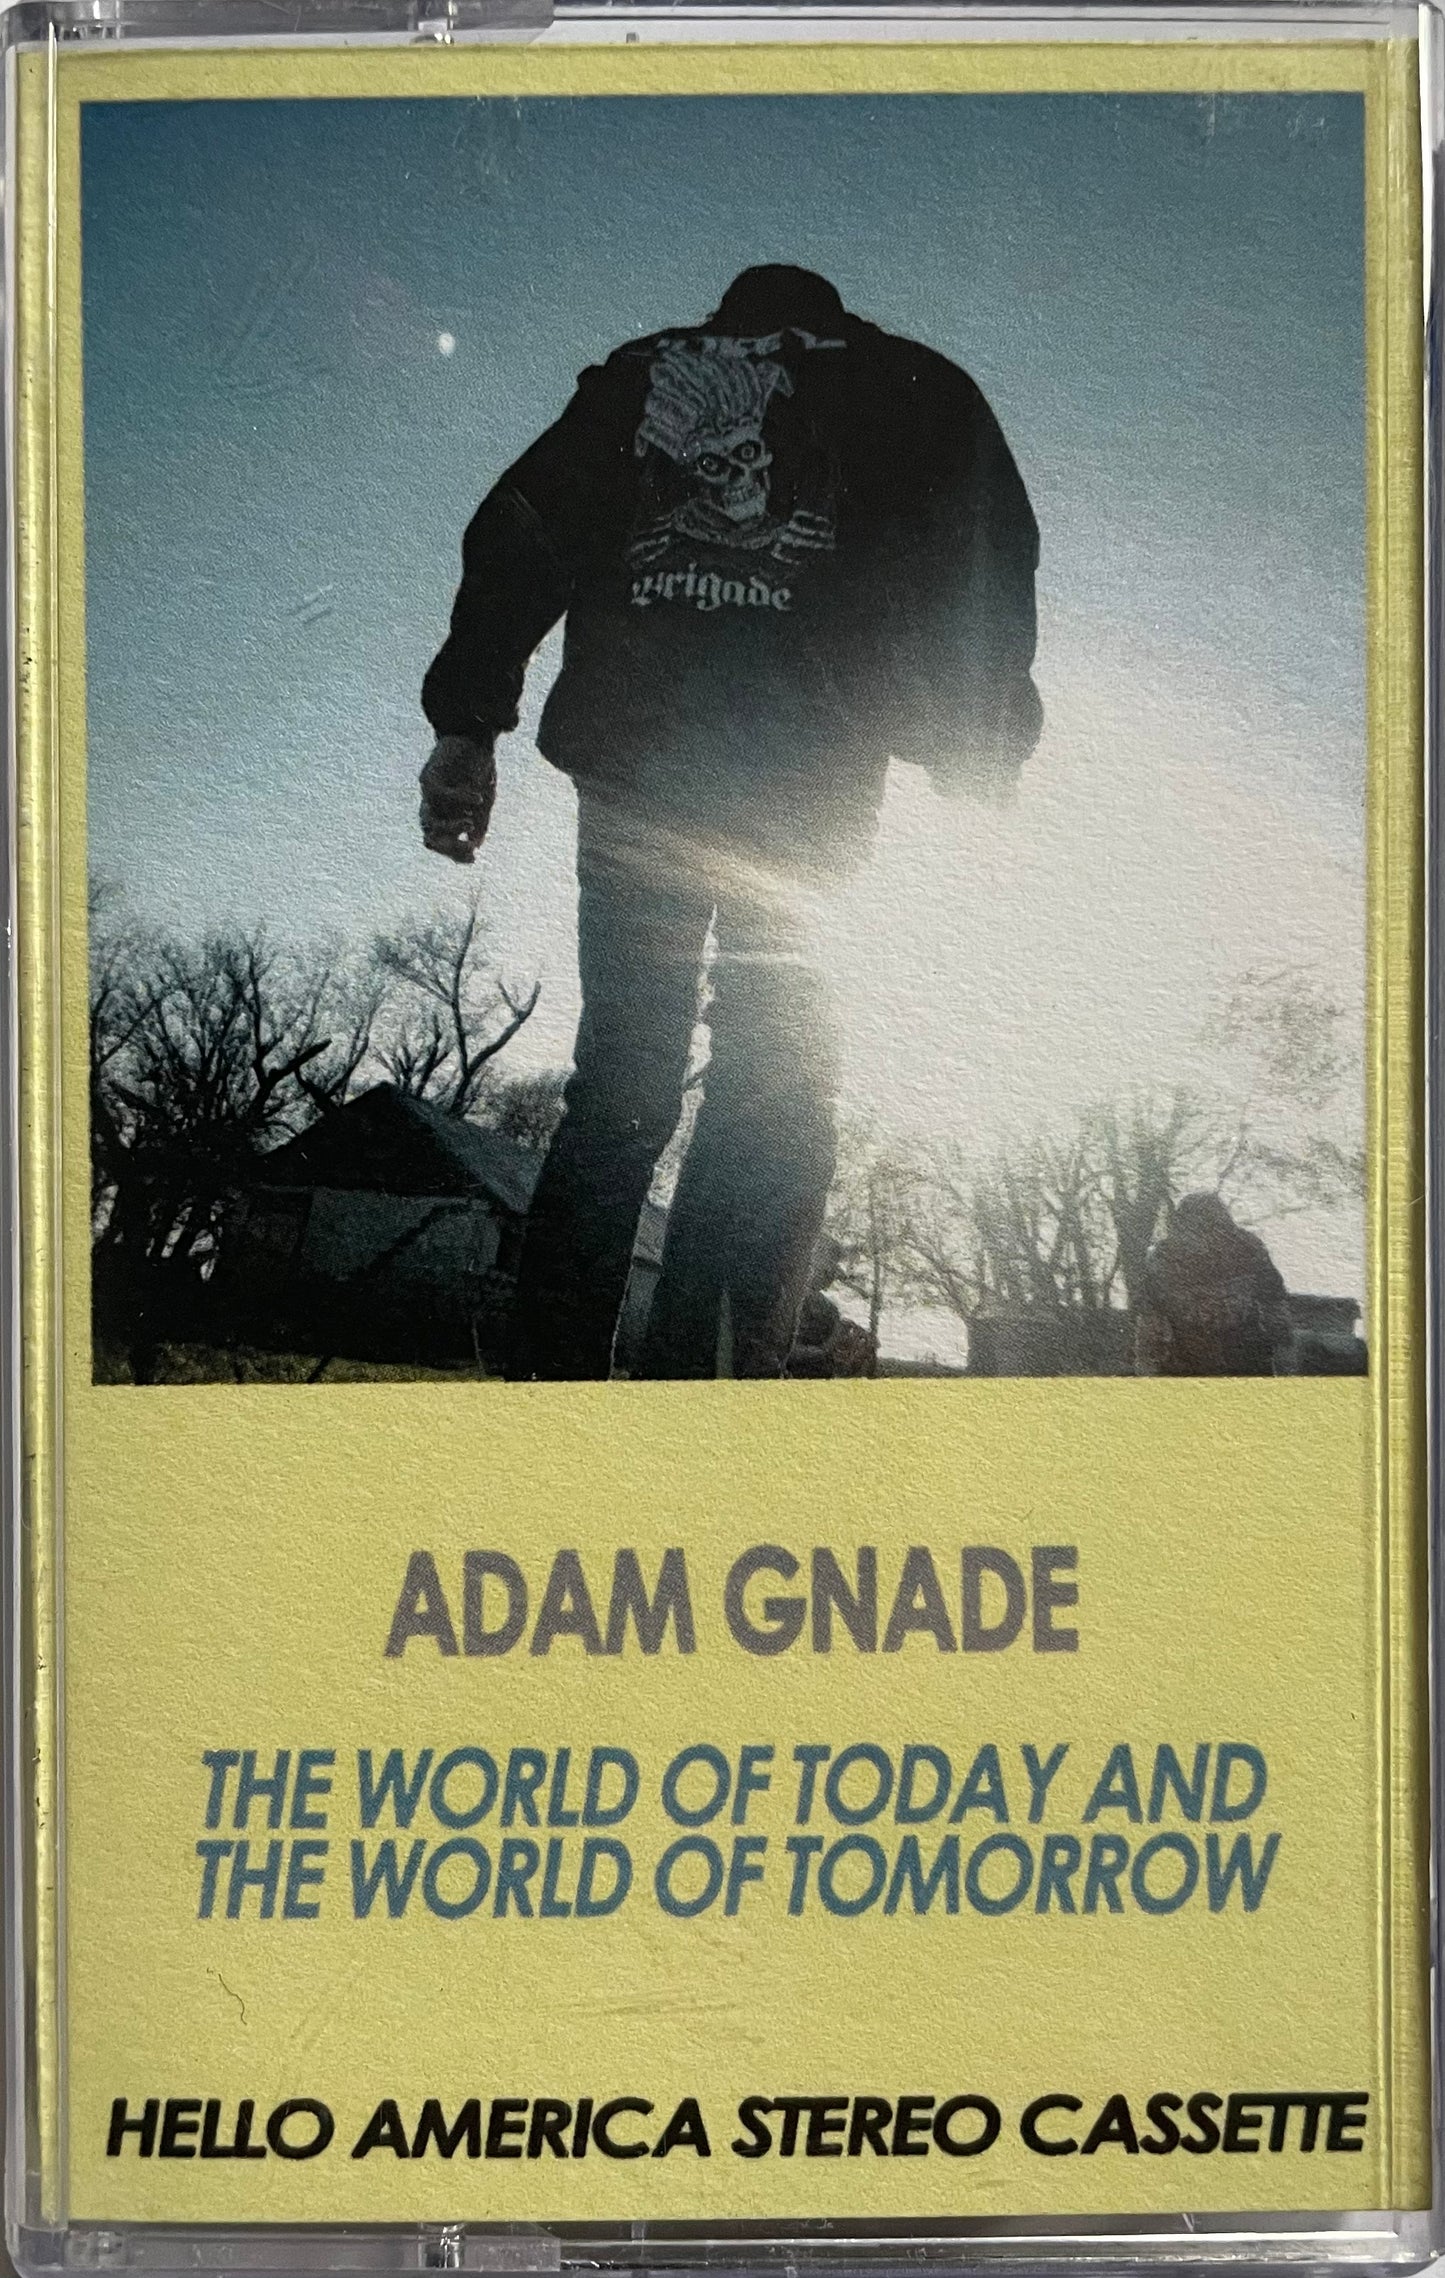 The World of Today and the World of Tomorrow, by Adam Gnade